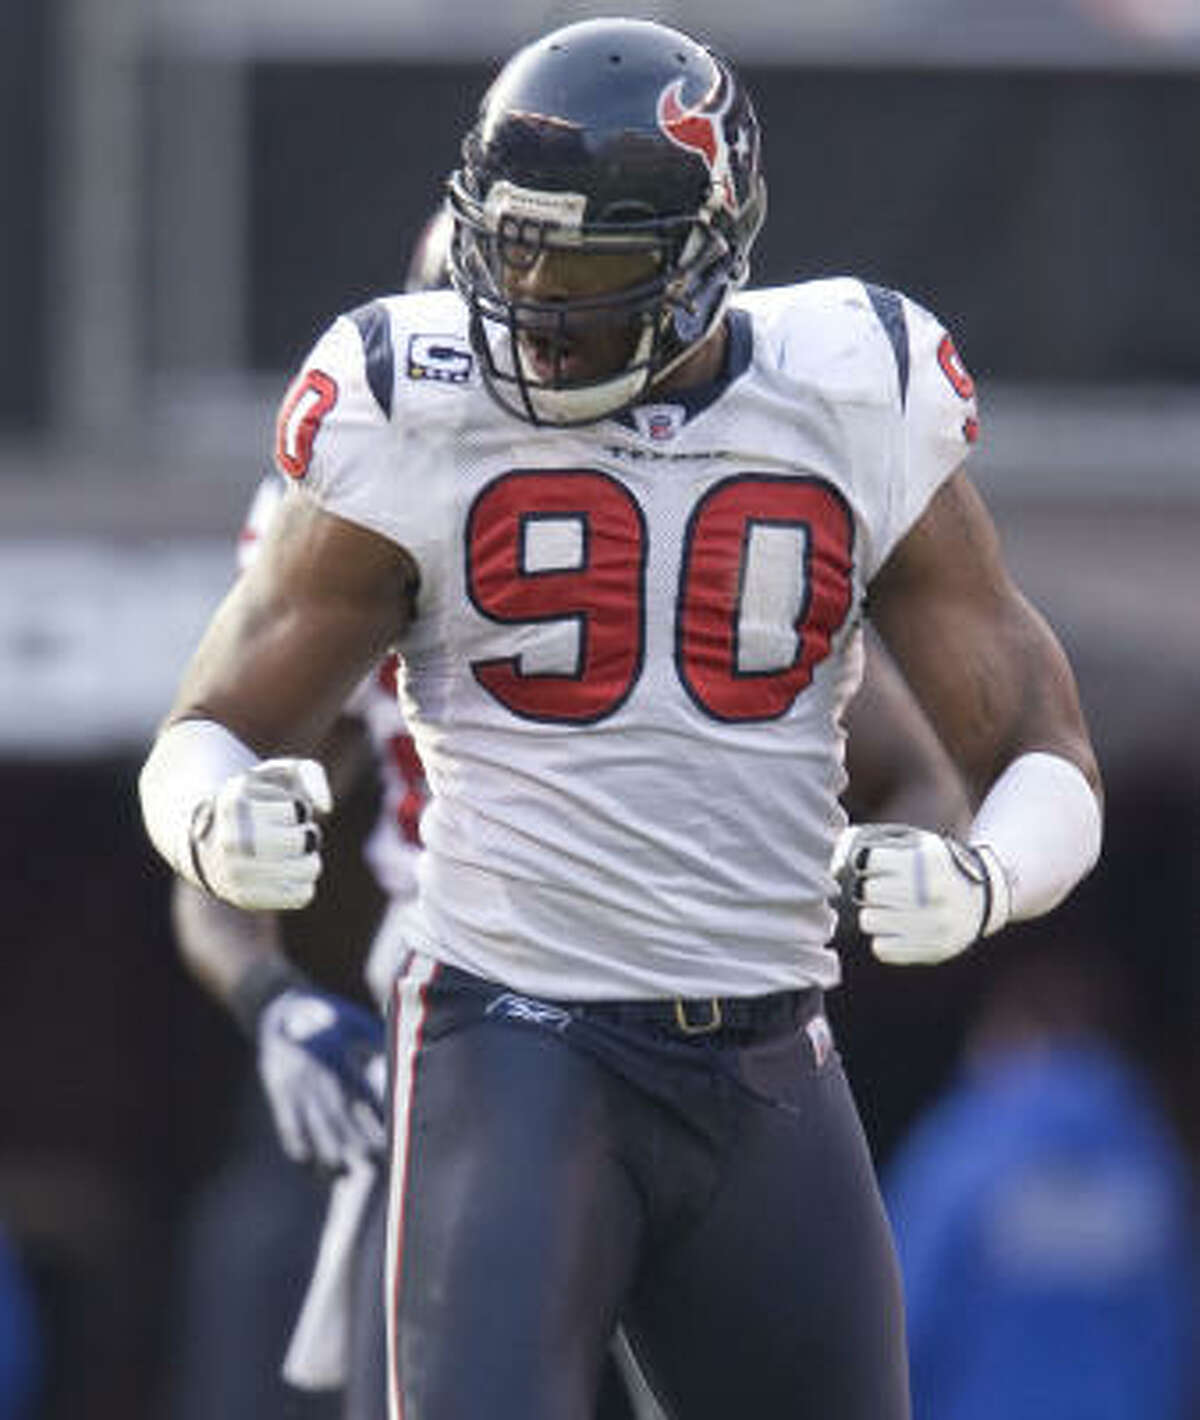 Texans defender Mario Williams celebrates after a tackle against the Cleveland Browns during the third quarter.